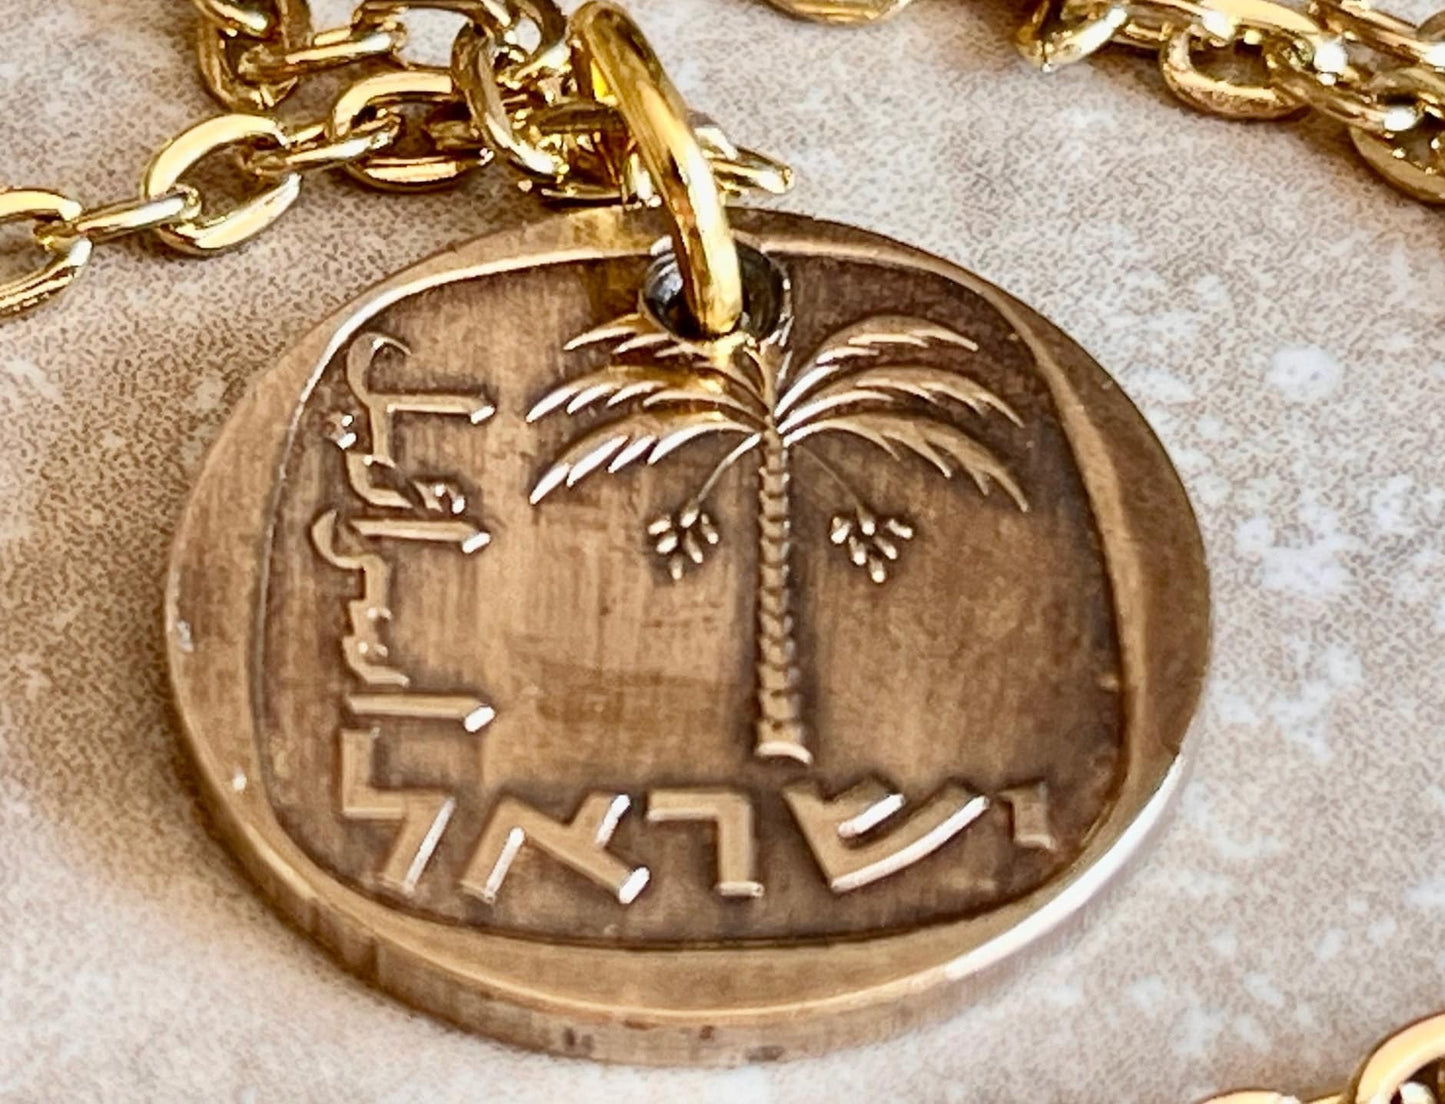 Israel Coin Necklace 10 Agorot Coin Personal Necklace Old Vintage Handmade Jewelry Gift Friend Charm For Him Her World Coin Collector